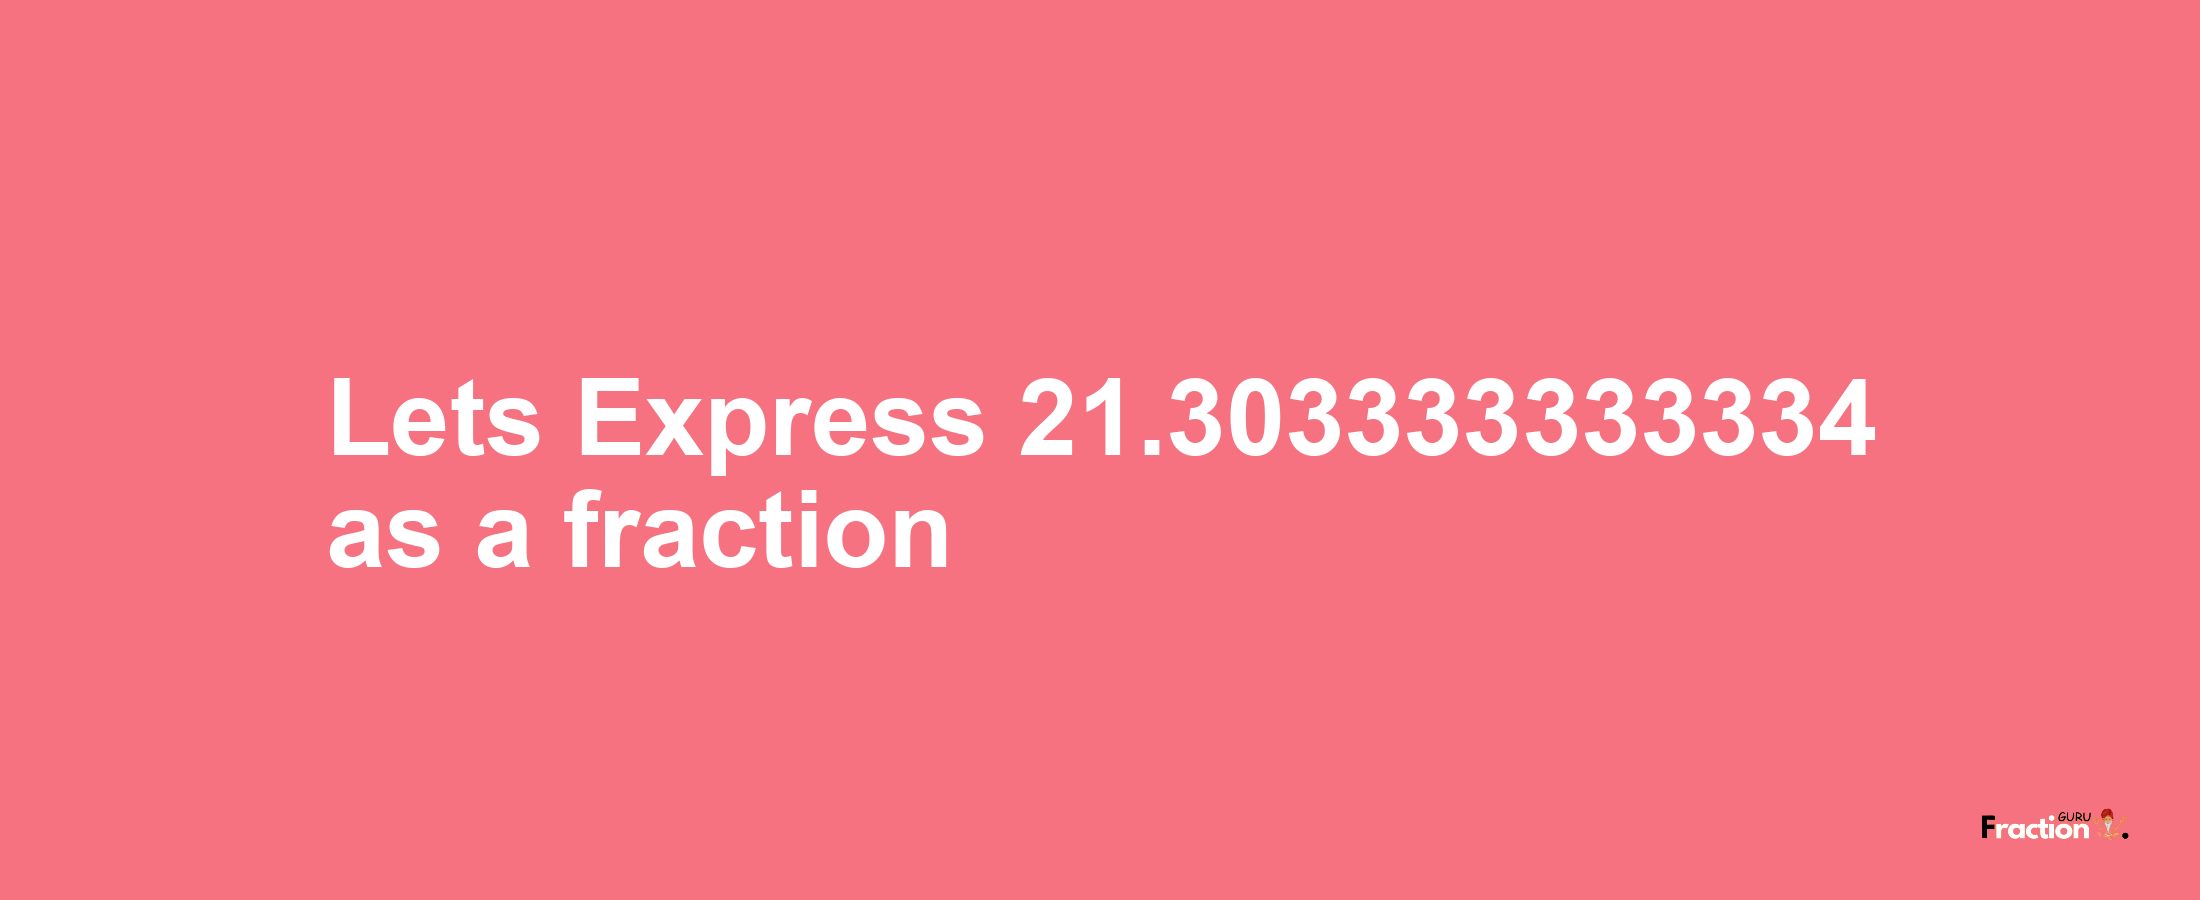 Lets Express 21.303333333334 as afraction